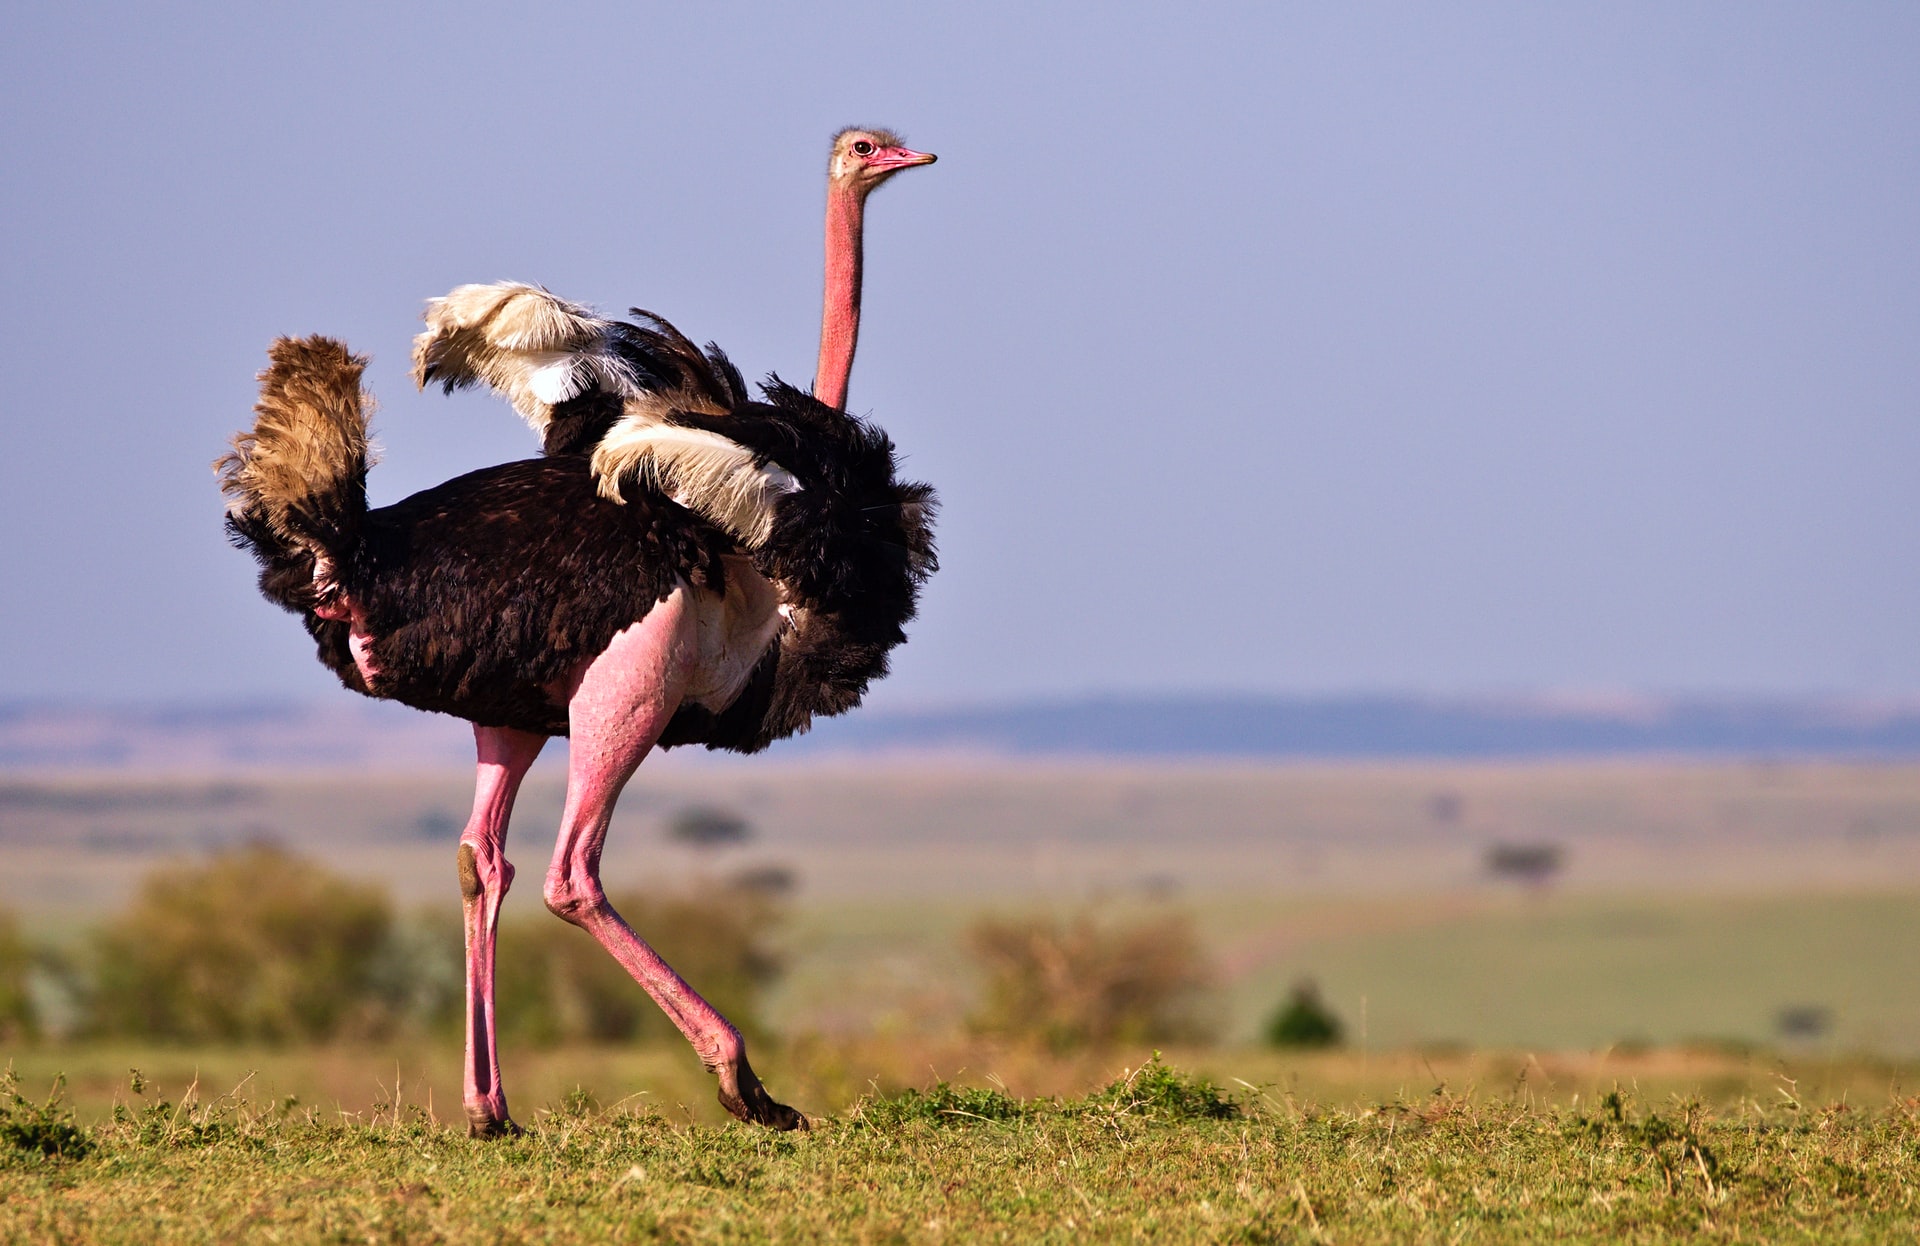 This is one of the ostrich fun facts